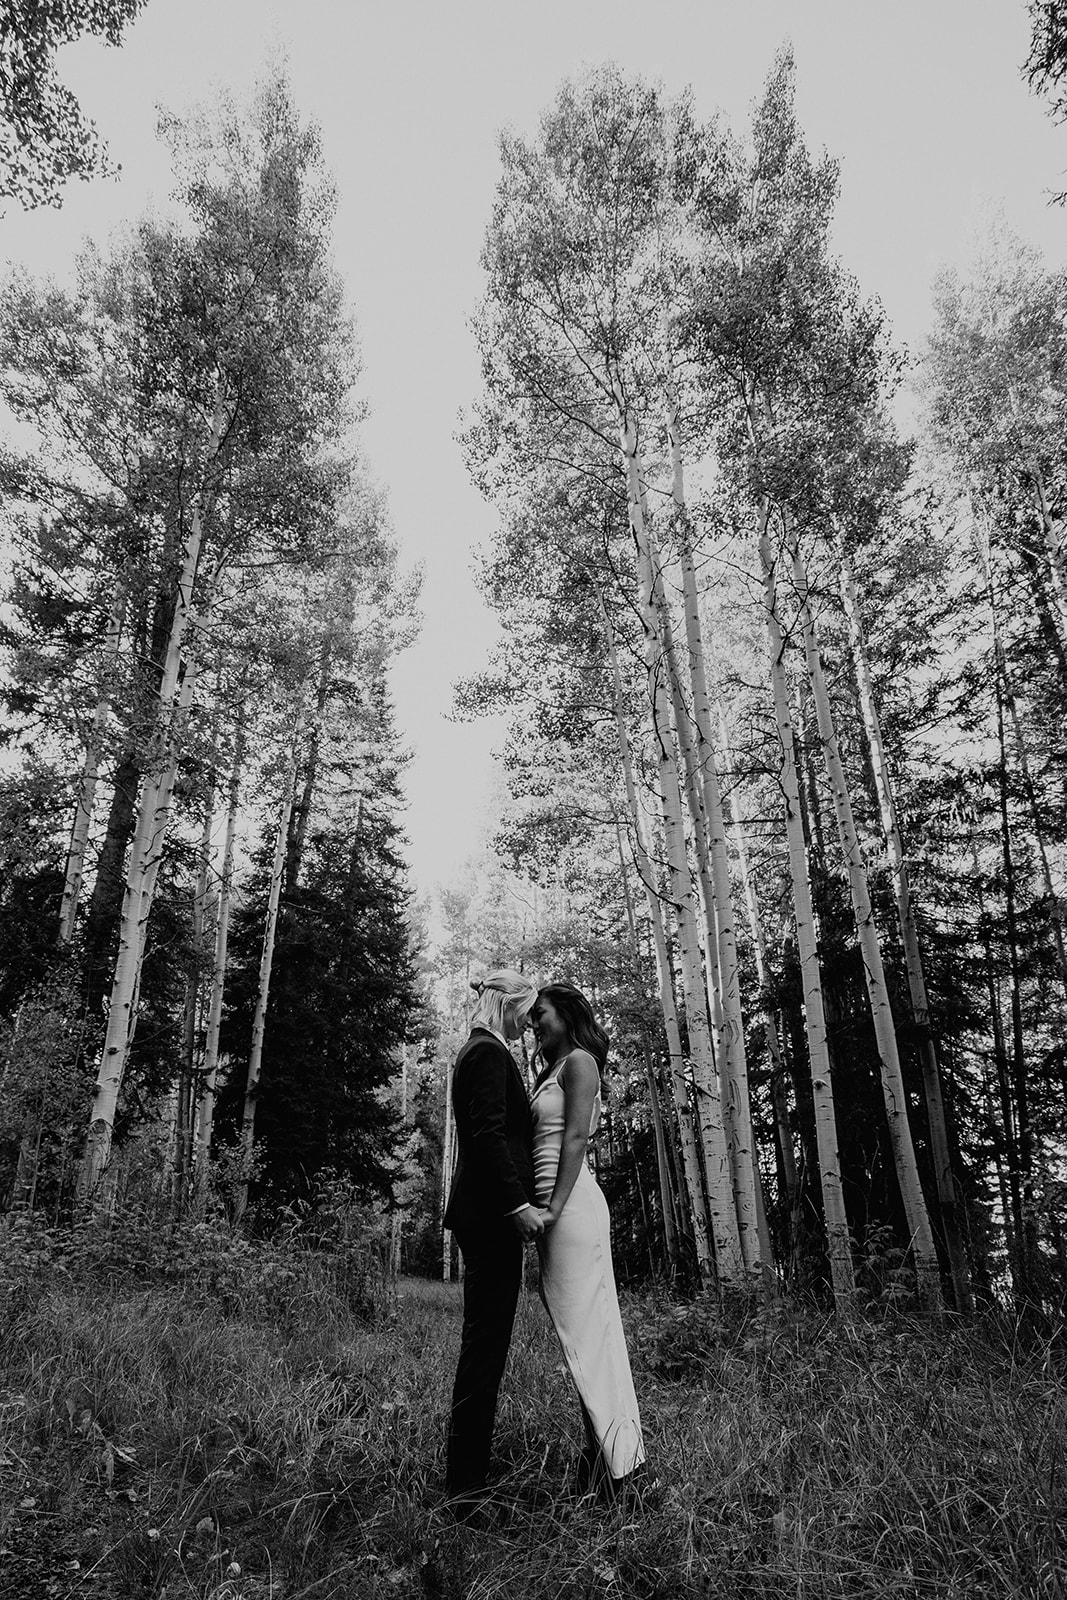 Adventurous Lesbian Elopement at Crested Butte in the mountains surrounded by towering trees